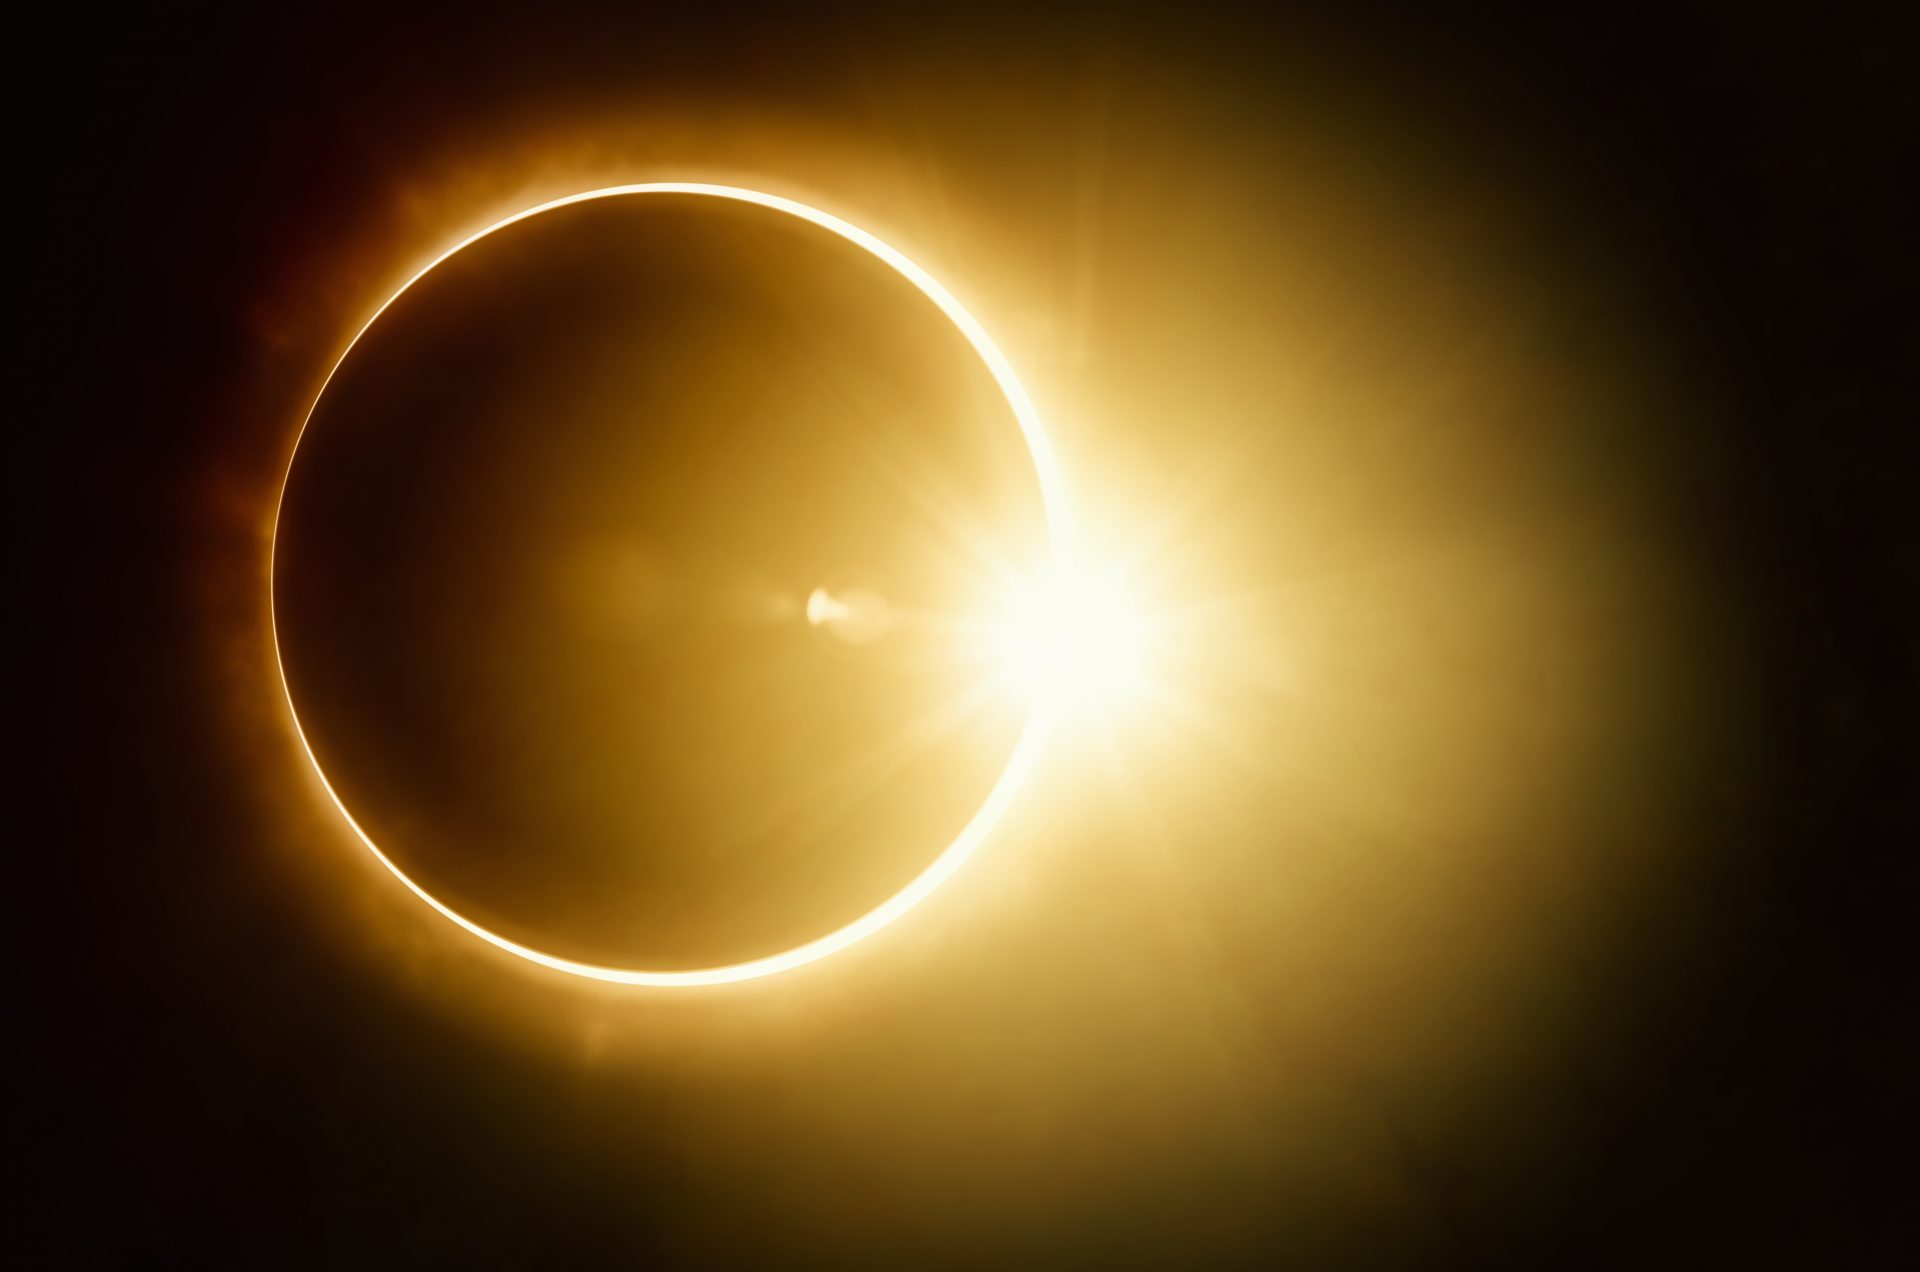 Can a Solar Eclipse Harm Your Foetus?